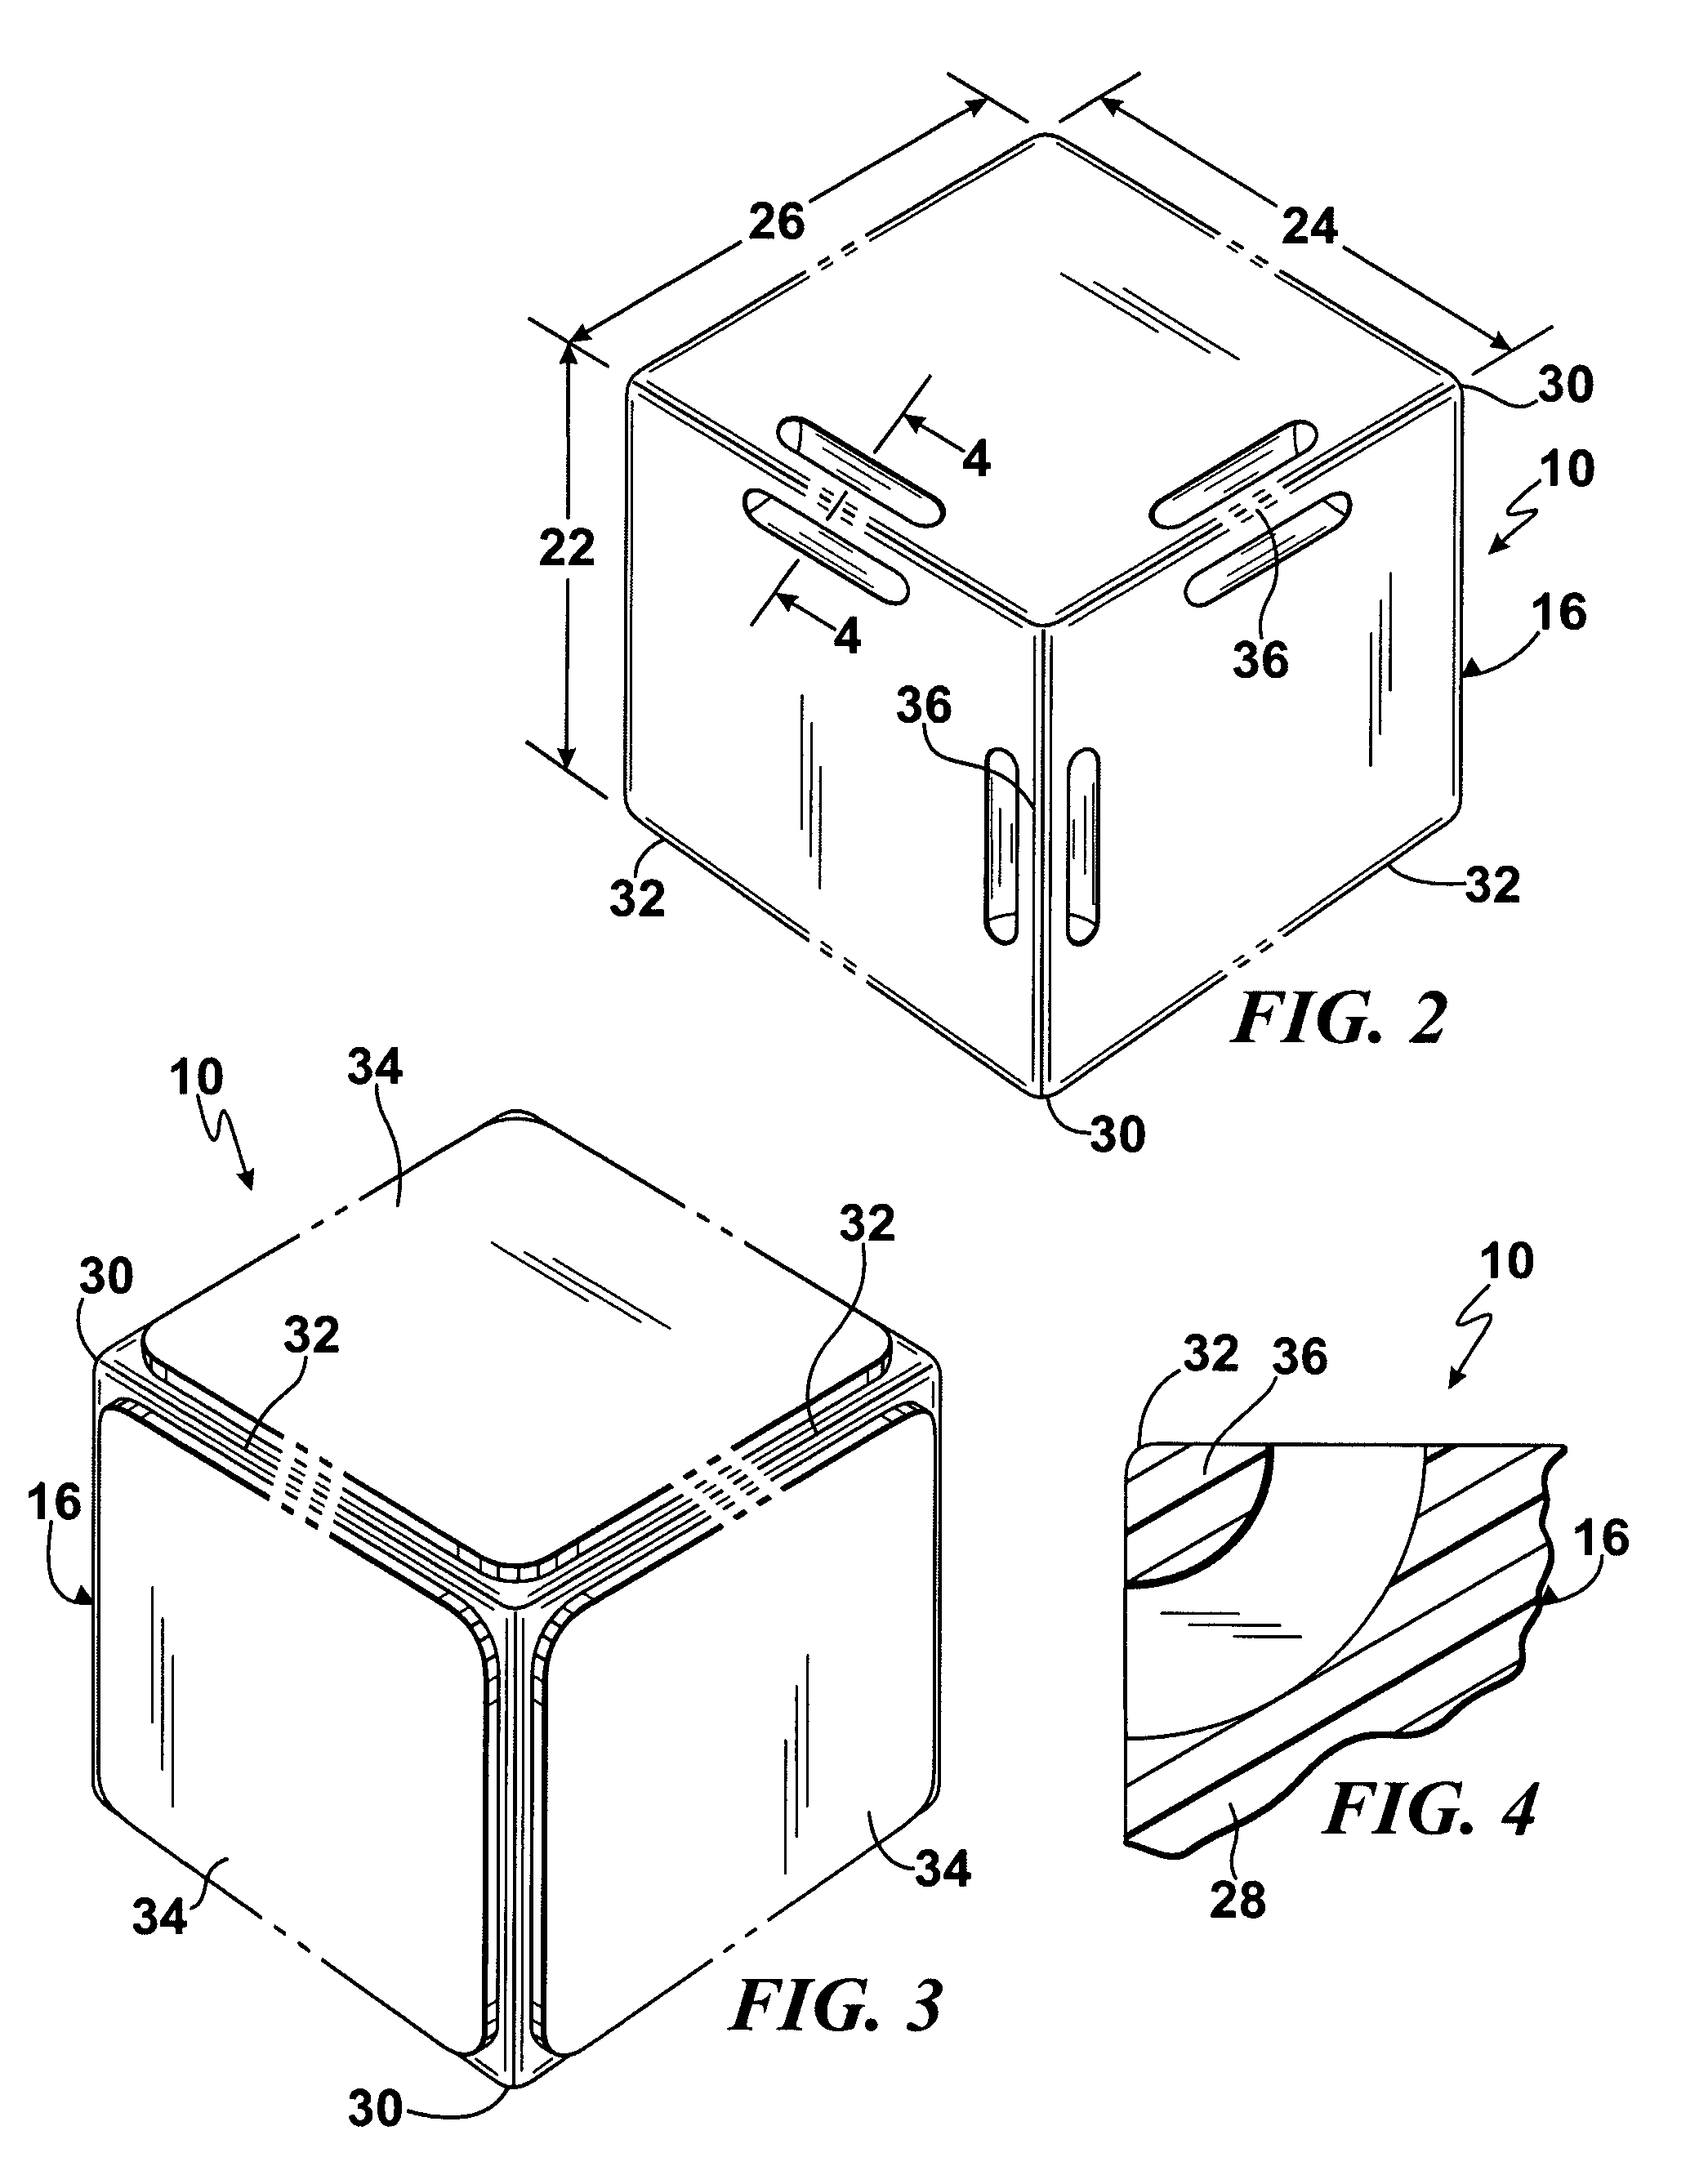 Device for a person to reduce straining during expulsion of fecal matter into a toilet